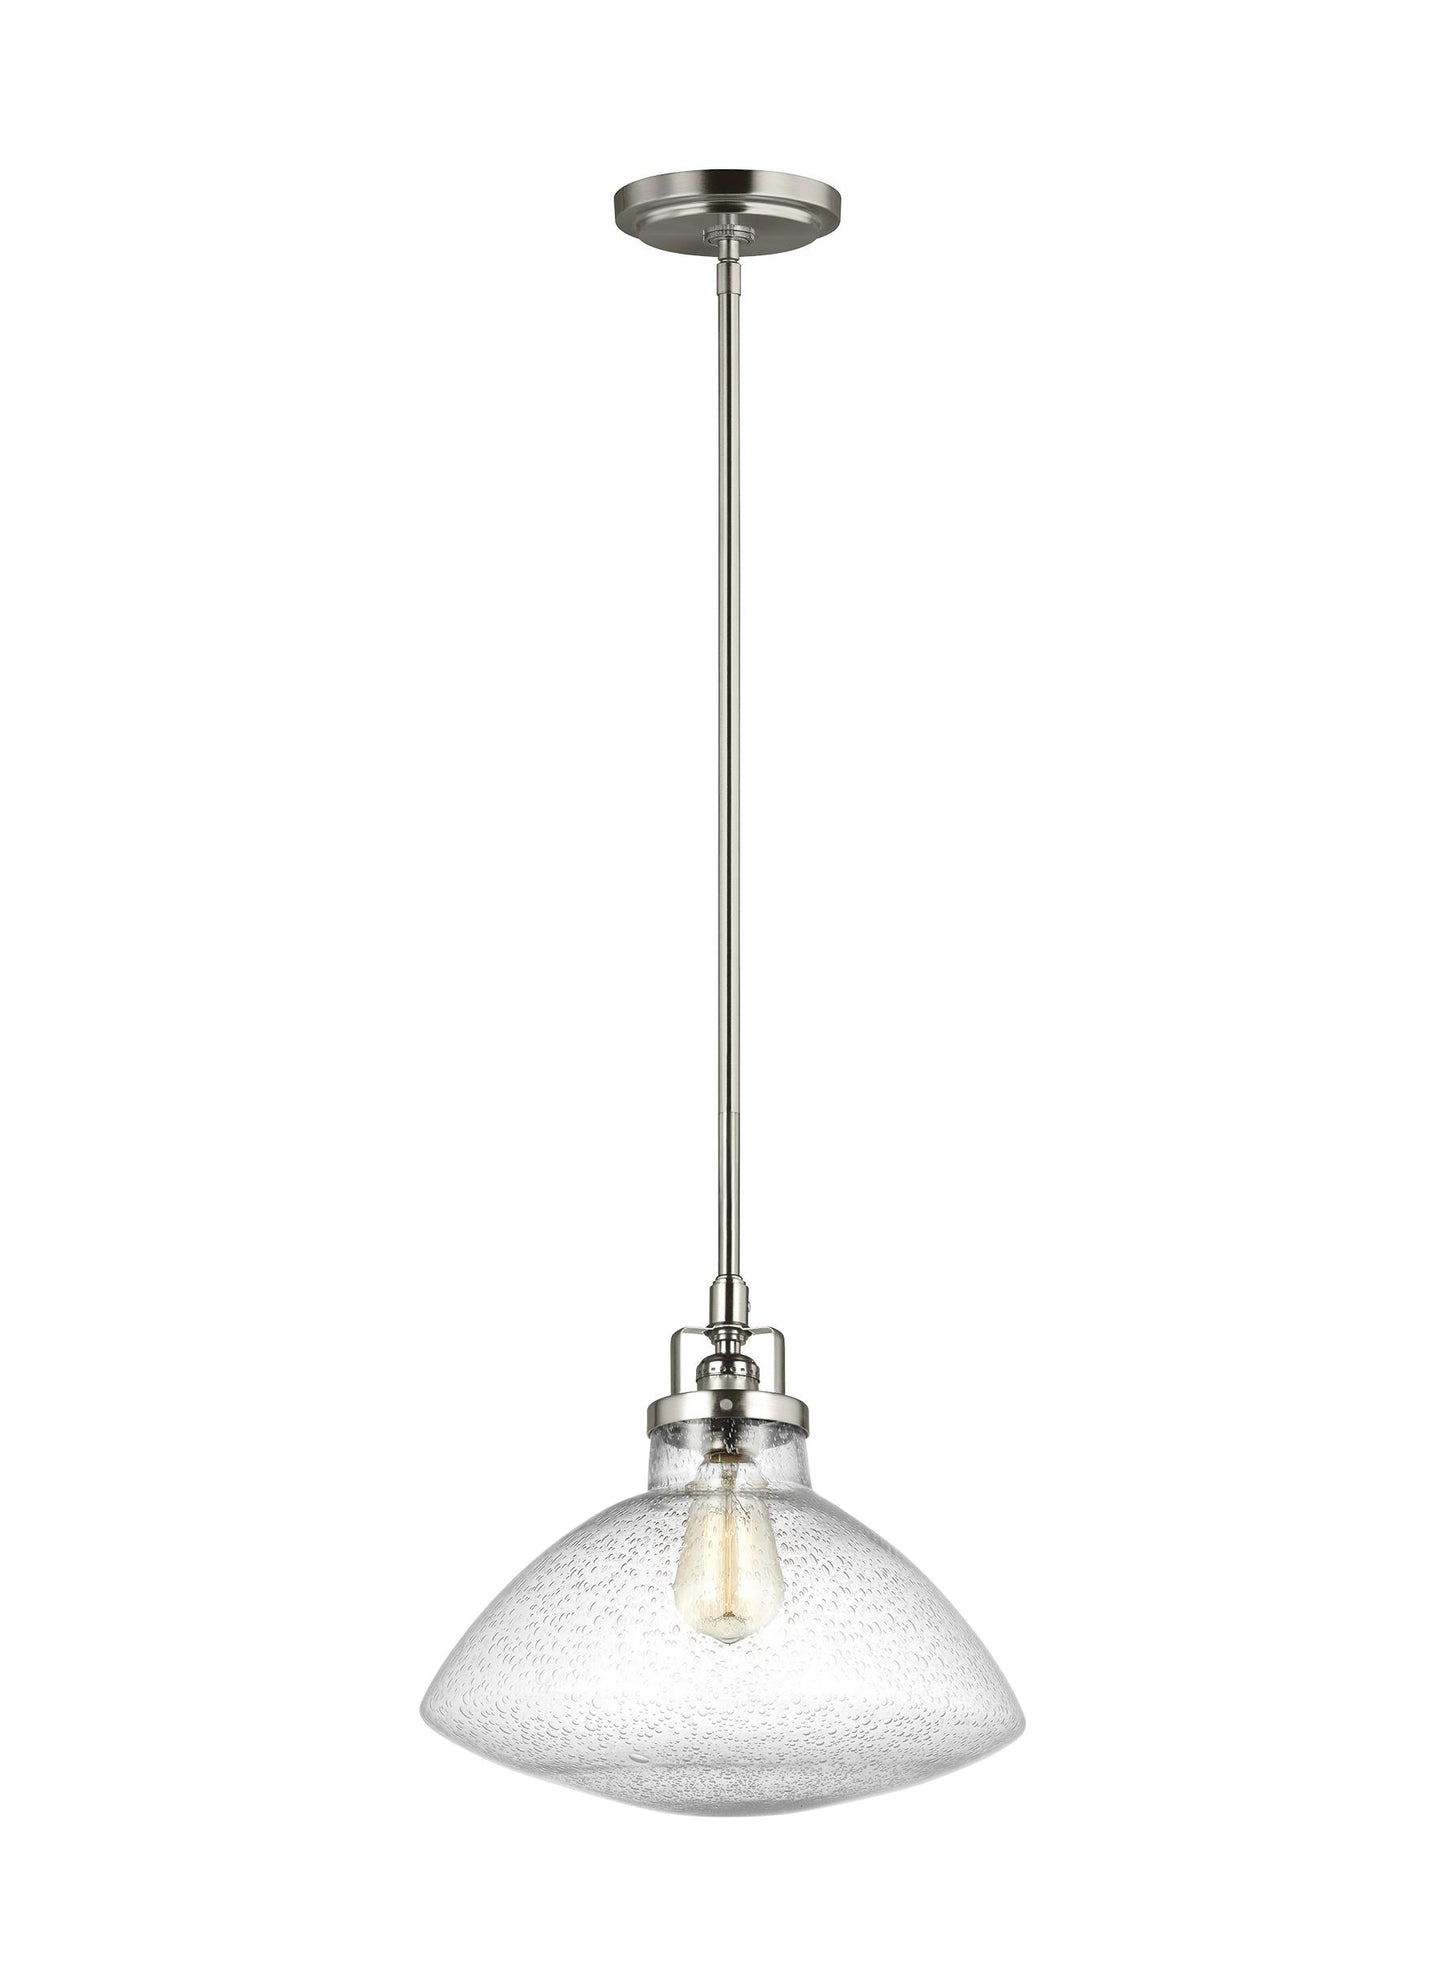 Belton transitional 1-light indoor dimmable ceiling hanging single pendant light in brushed nickel silver finish with smal...